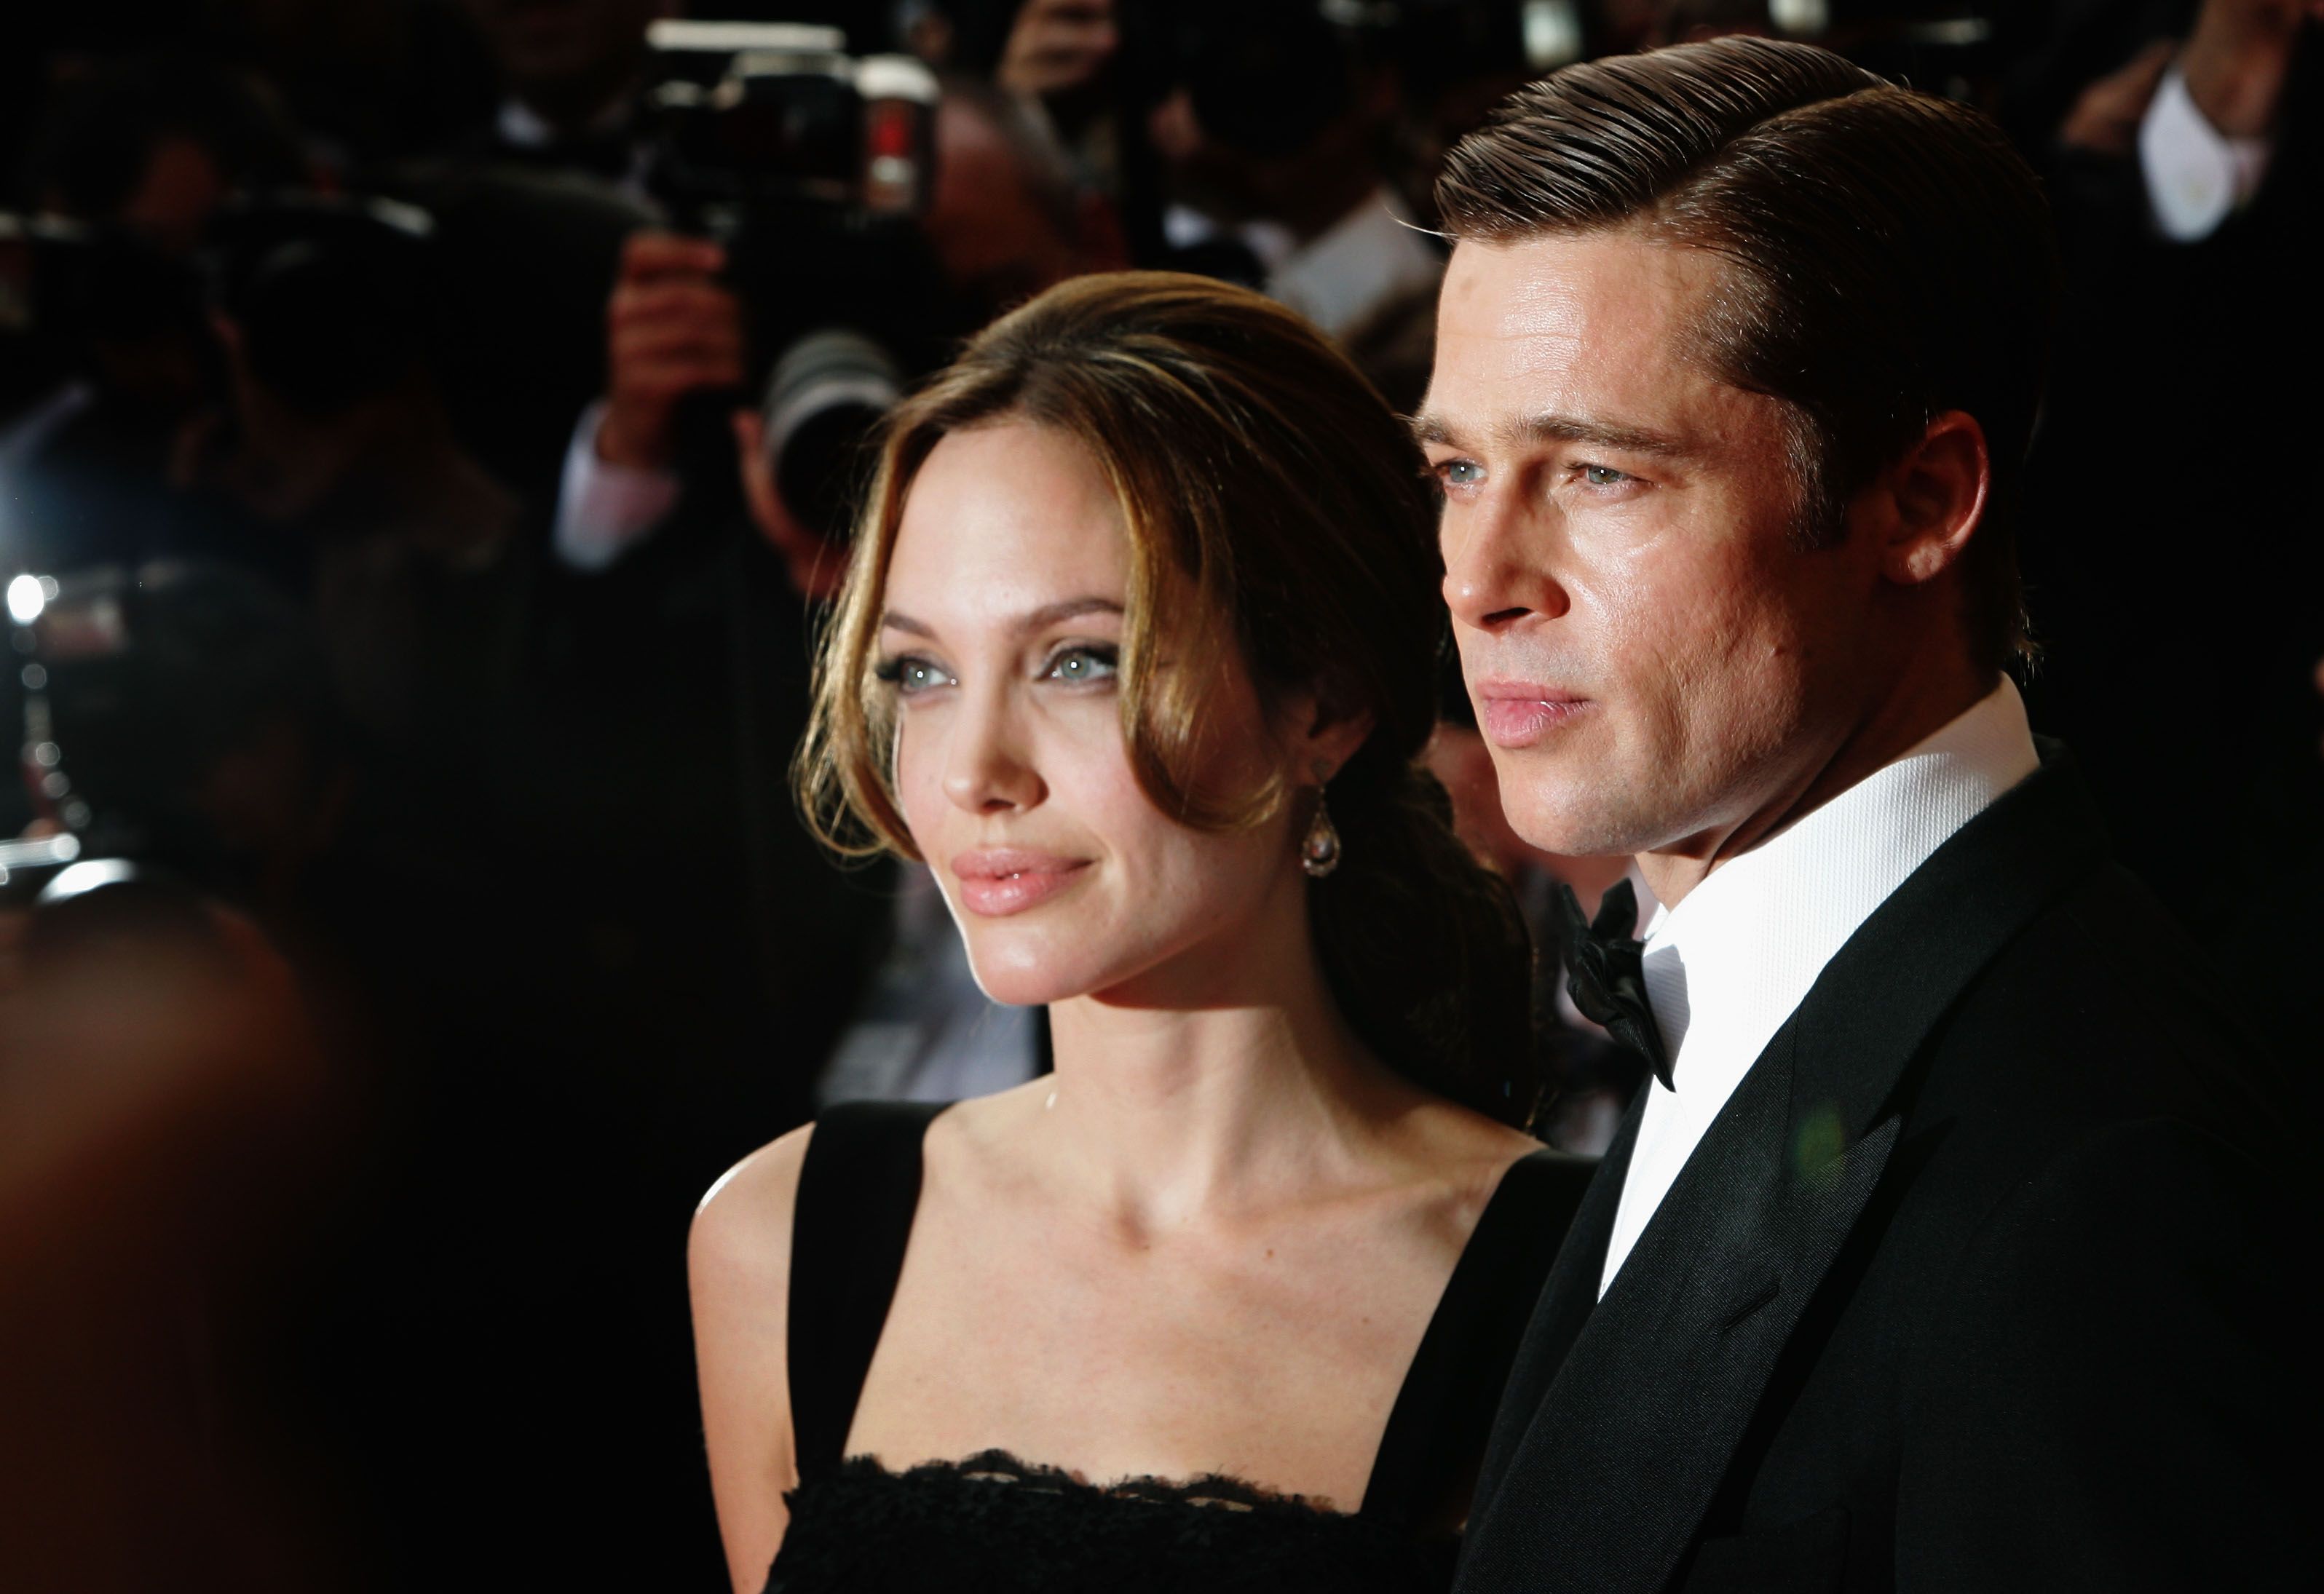 Angelina Jolie and Brad Pitt at the premiere of "A Mighty Heart" at the 60th International Cannes Film Festival in 2007 | Source: Getty Images